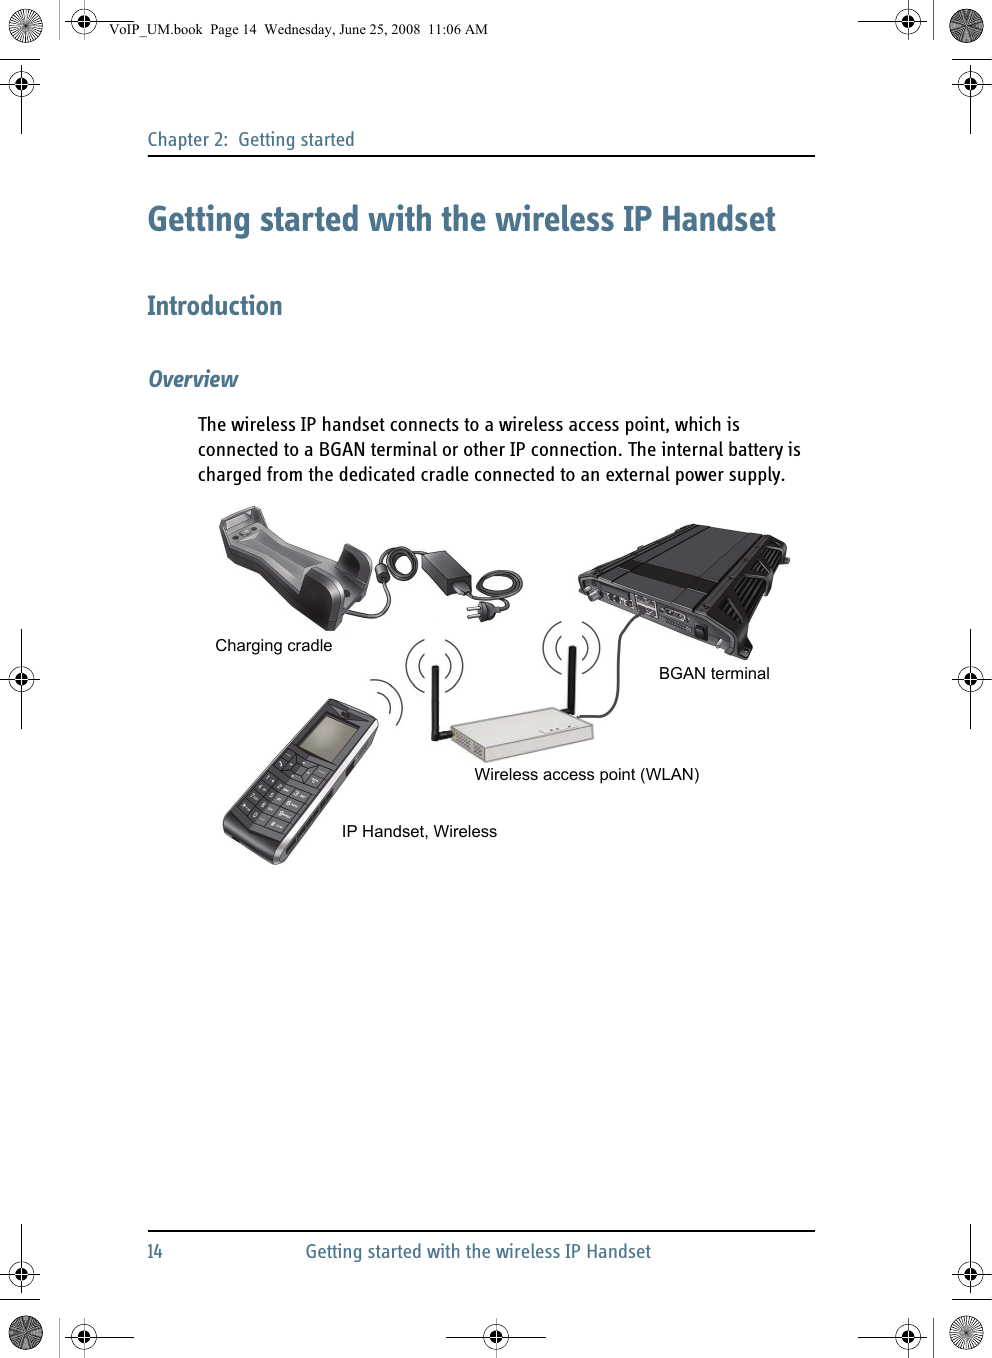 Chapter 2:  Getting started14 Getting started with the wireless IP HandsetGetting started with the wireless IP HandsetIntroductionOverviewThe wireless IP handset connects to a wireless access point, which is connected to a BGAN terminal or other IP connection. The internal battery is charged from the dedicated cradle connected to an external power supply.Wireless access point (WLAN)BGAN terminalCharging cradleIP Handset, WirelessVoIP_UM.book  Page 14  Wednesday, June 25, 2008  11:06 AM